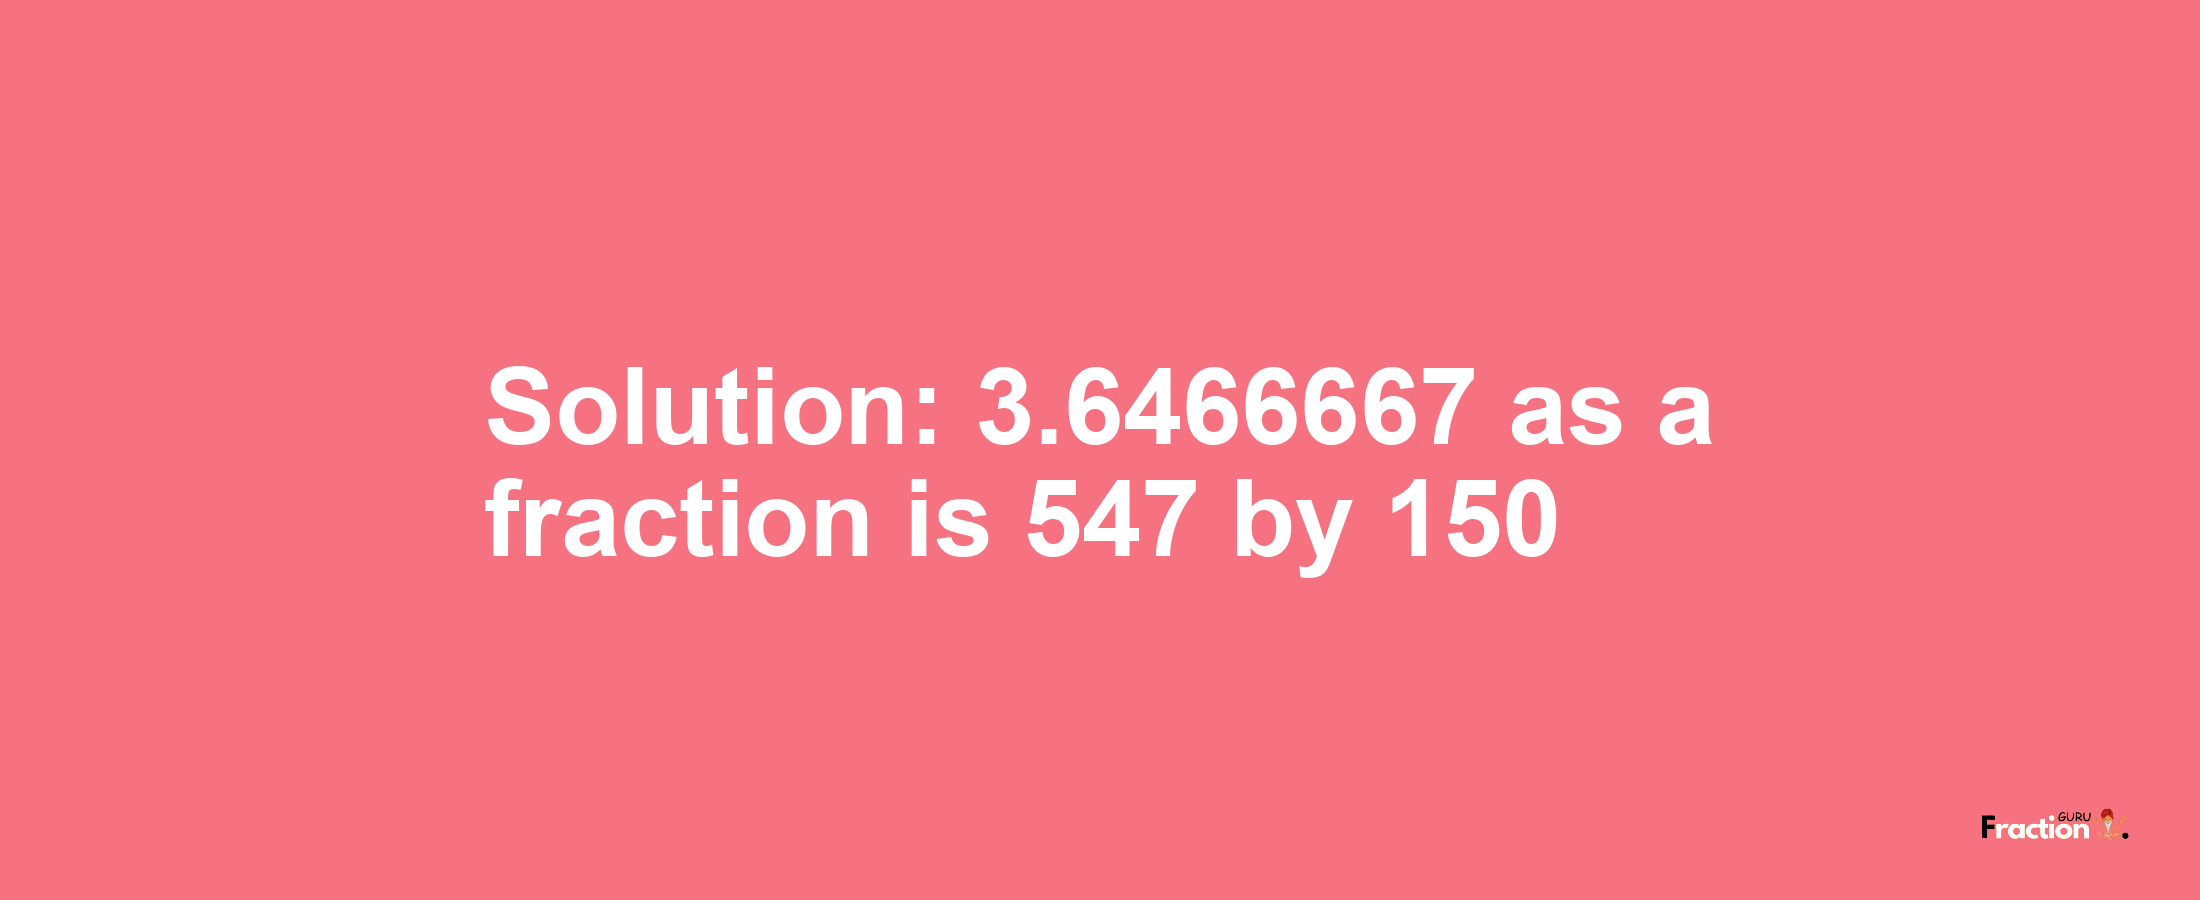 Solution:3.6466667 as a fraction is 547/150